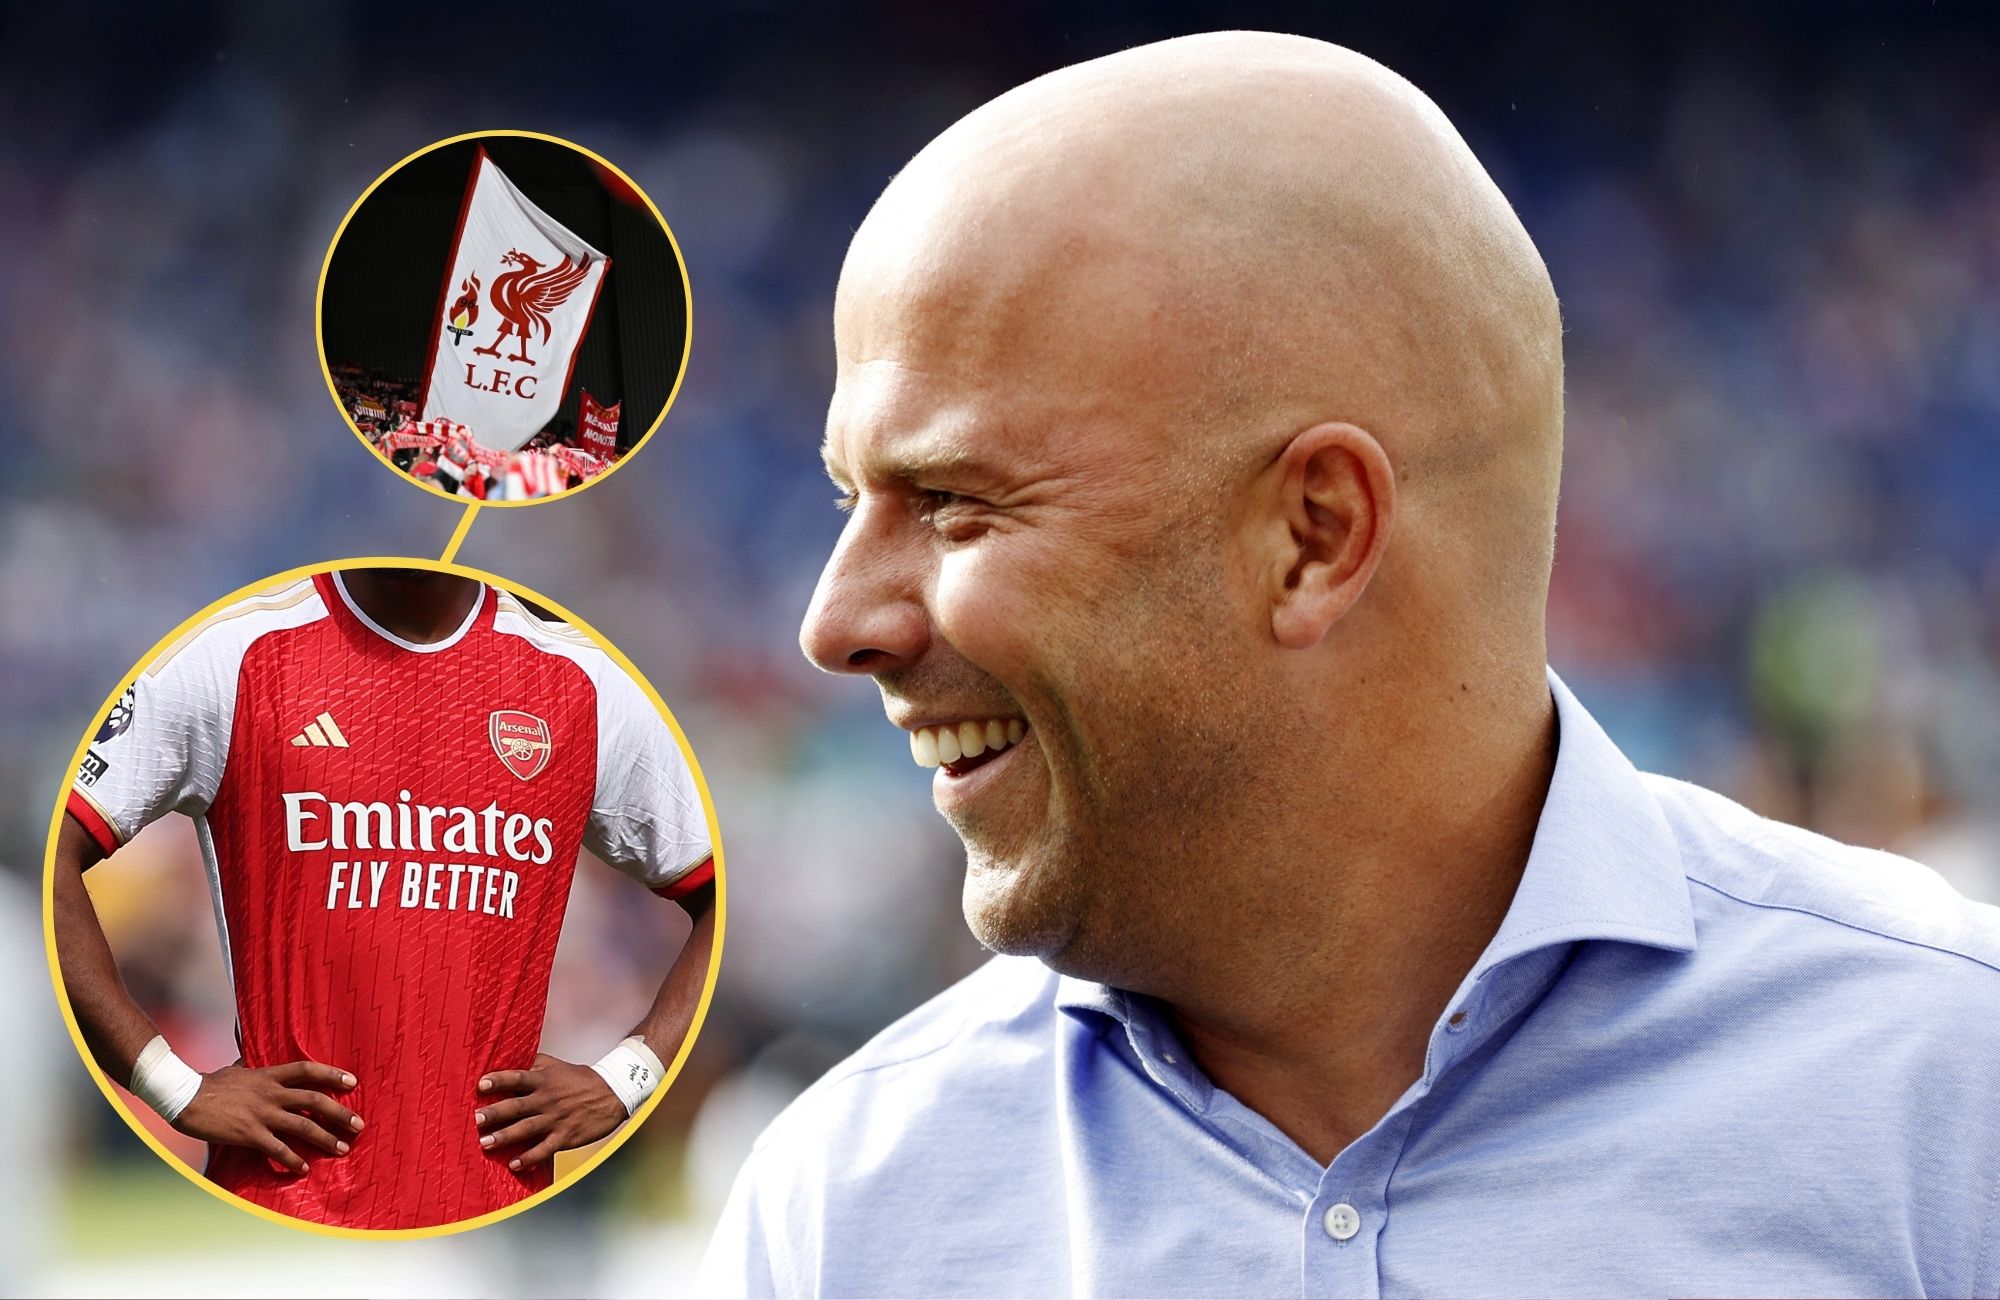 Exclusive: Arne Slot could bring ‘monster’ Arsenal player’s brother with him as Salah question persists